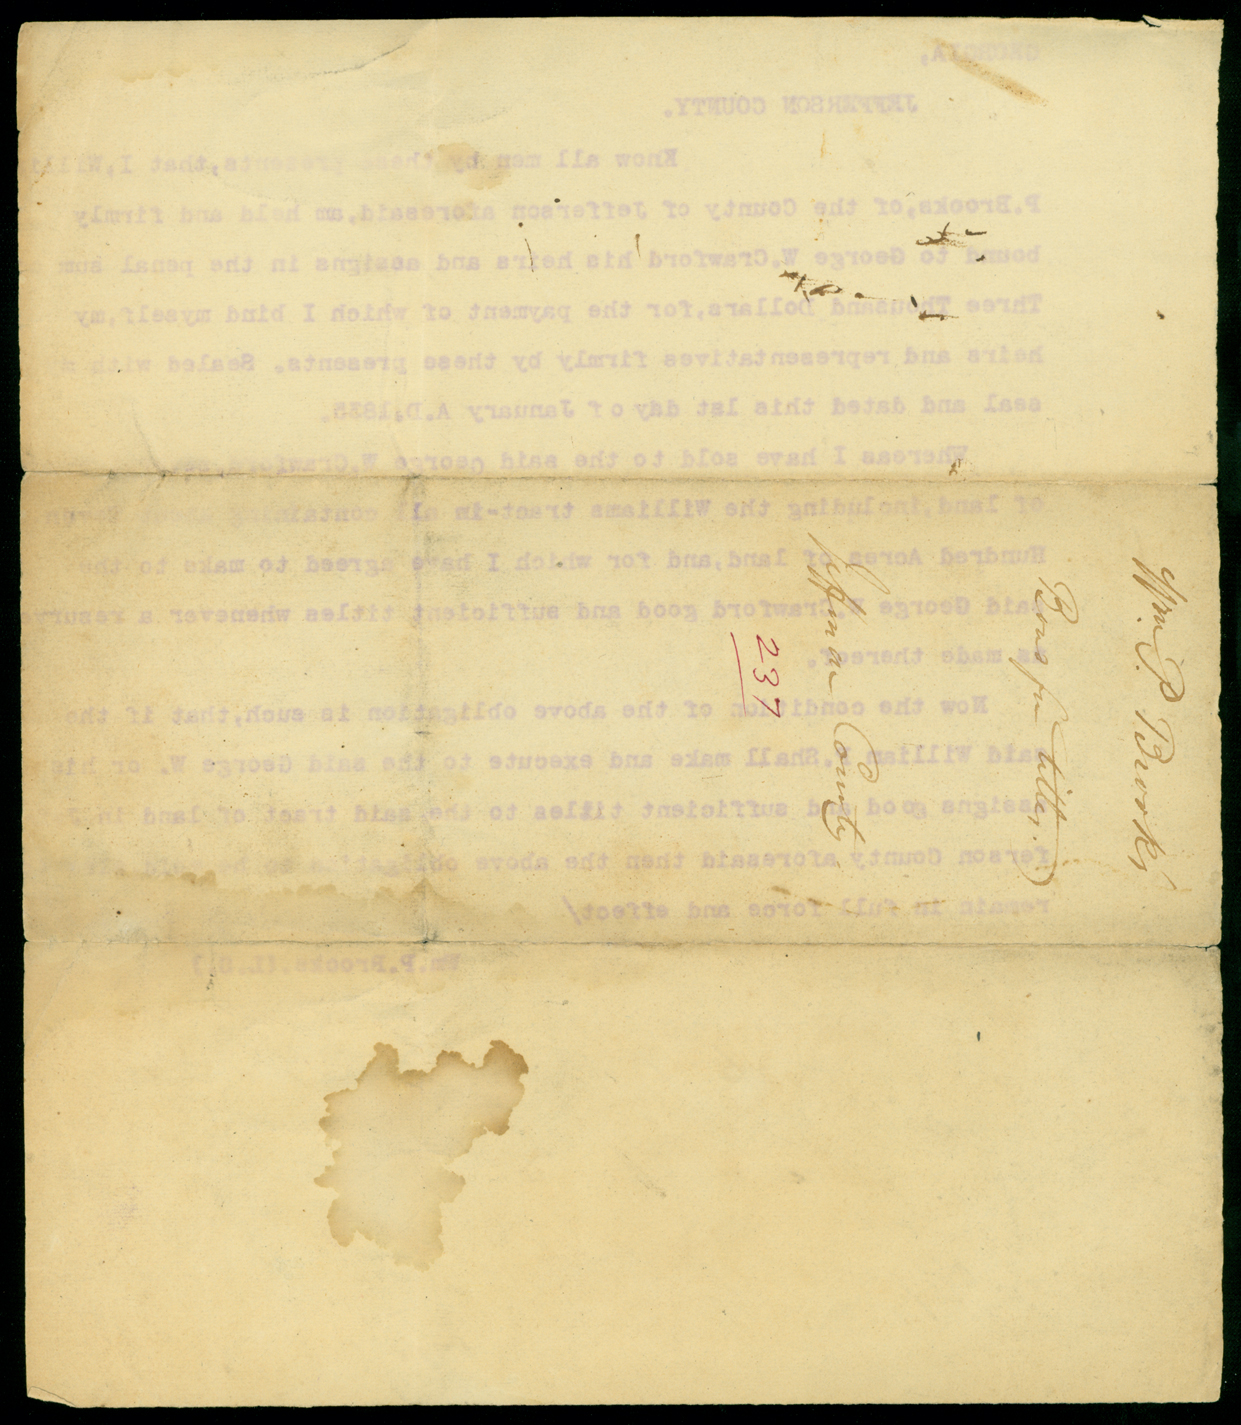 Land record, W[illia]m P. Brooks, Bond for titles to land sold to George W. Crawford, Page 2